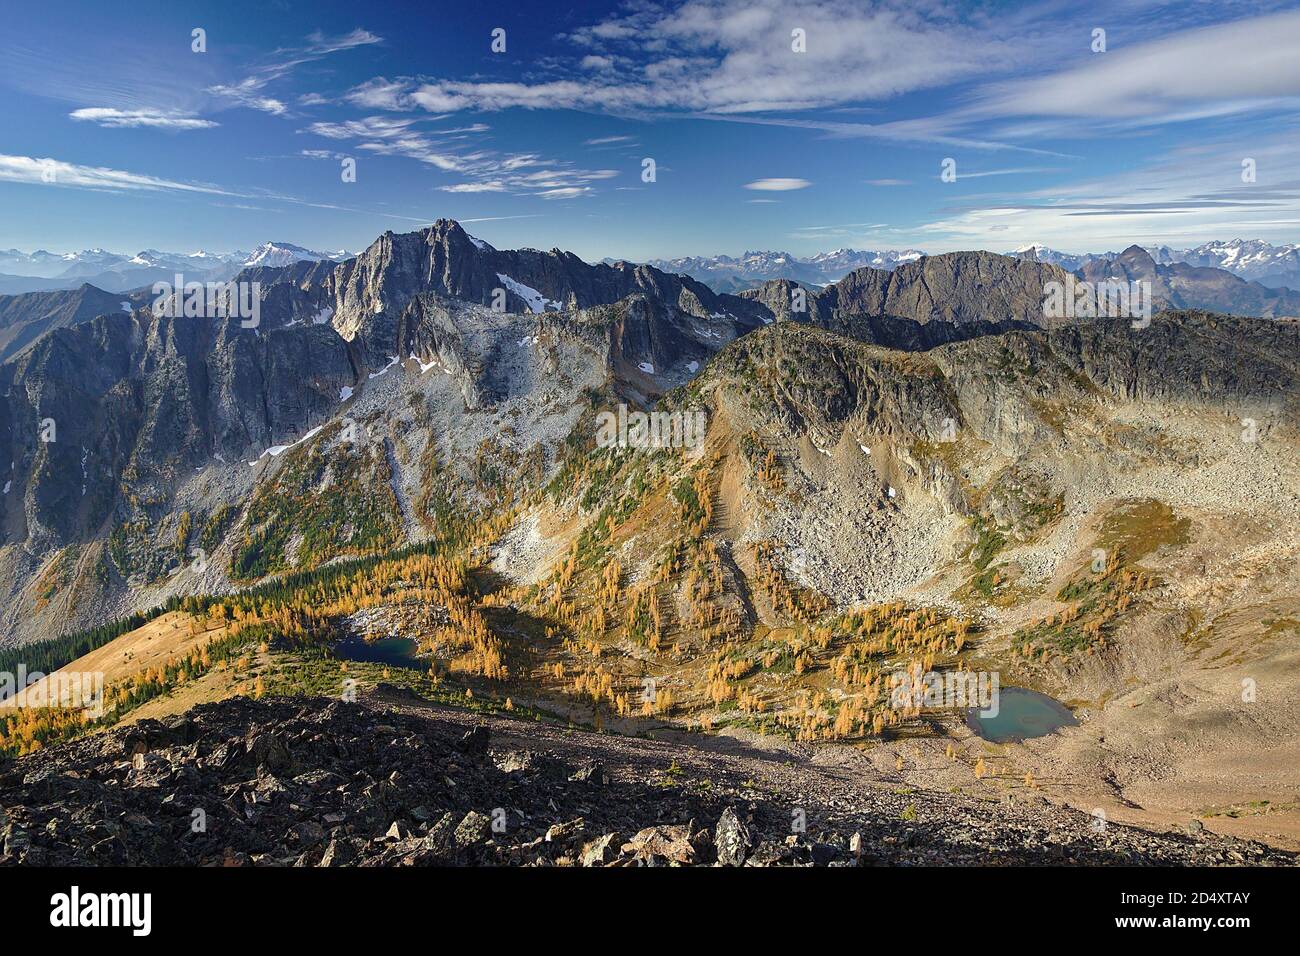 Panoramic view of mountain valley with two glacial lakes, yellow golden larches, Mount Frosty,  Manning Provincial Park, British Columbia, Canada Stock Photo